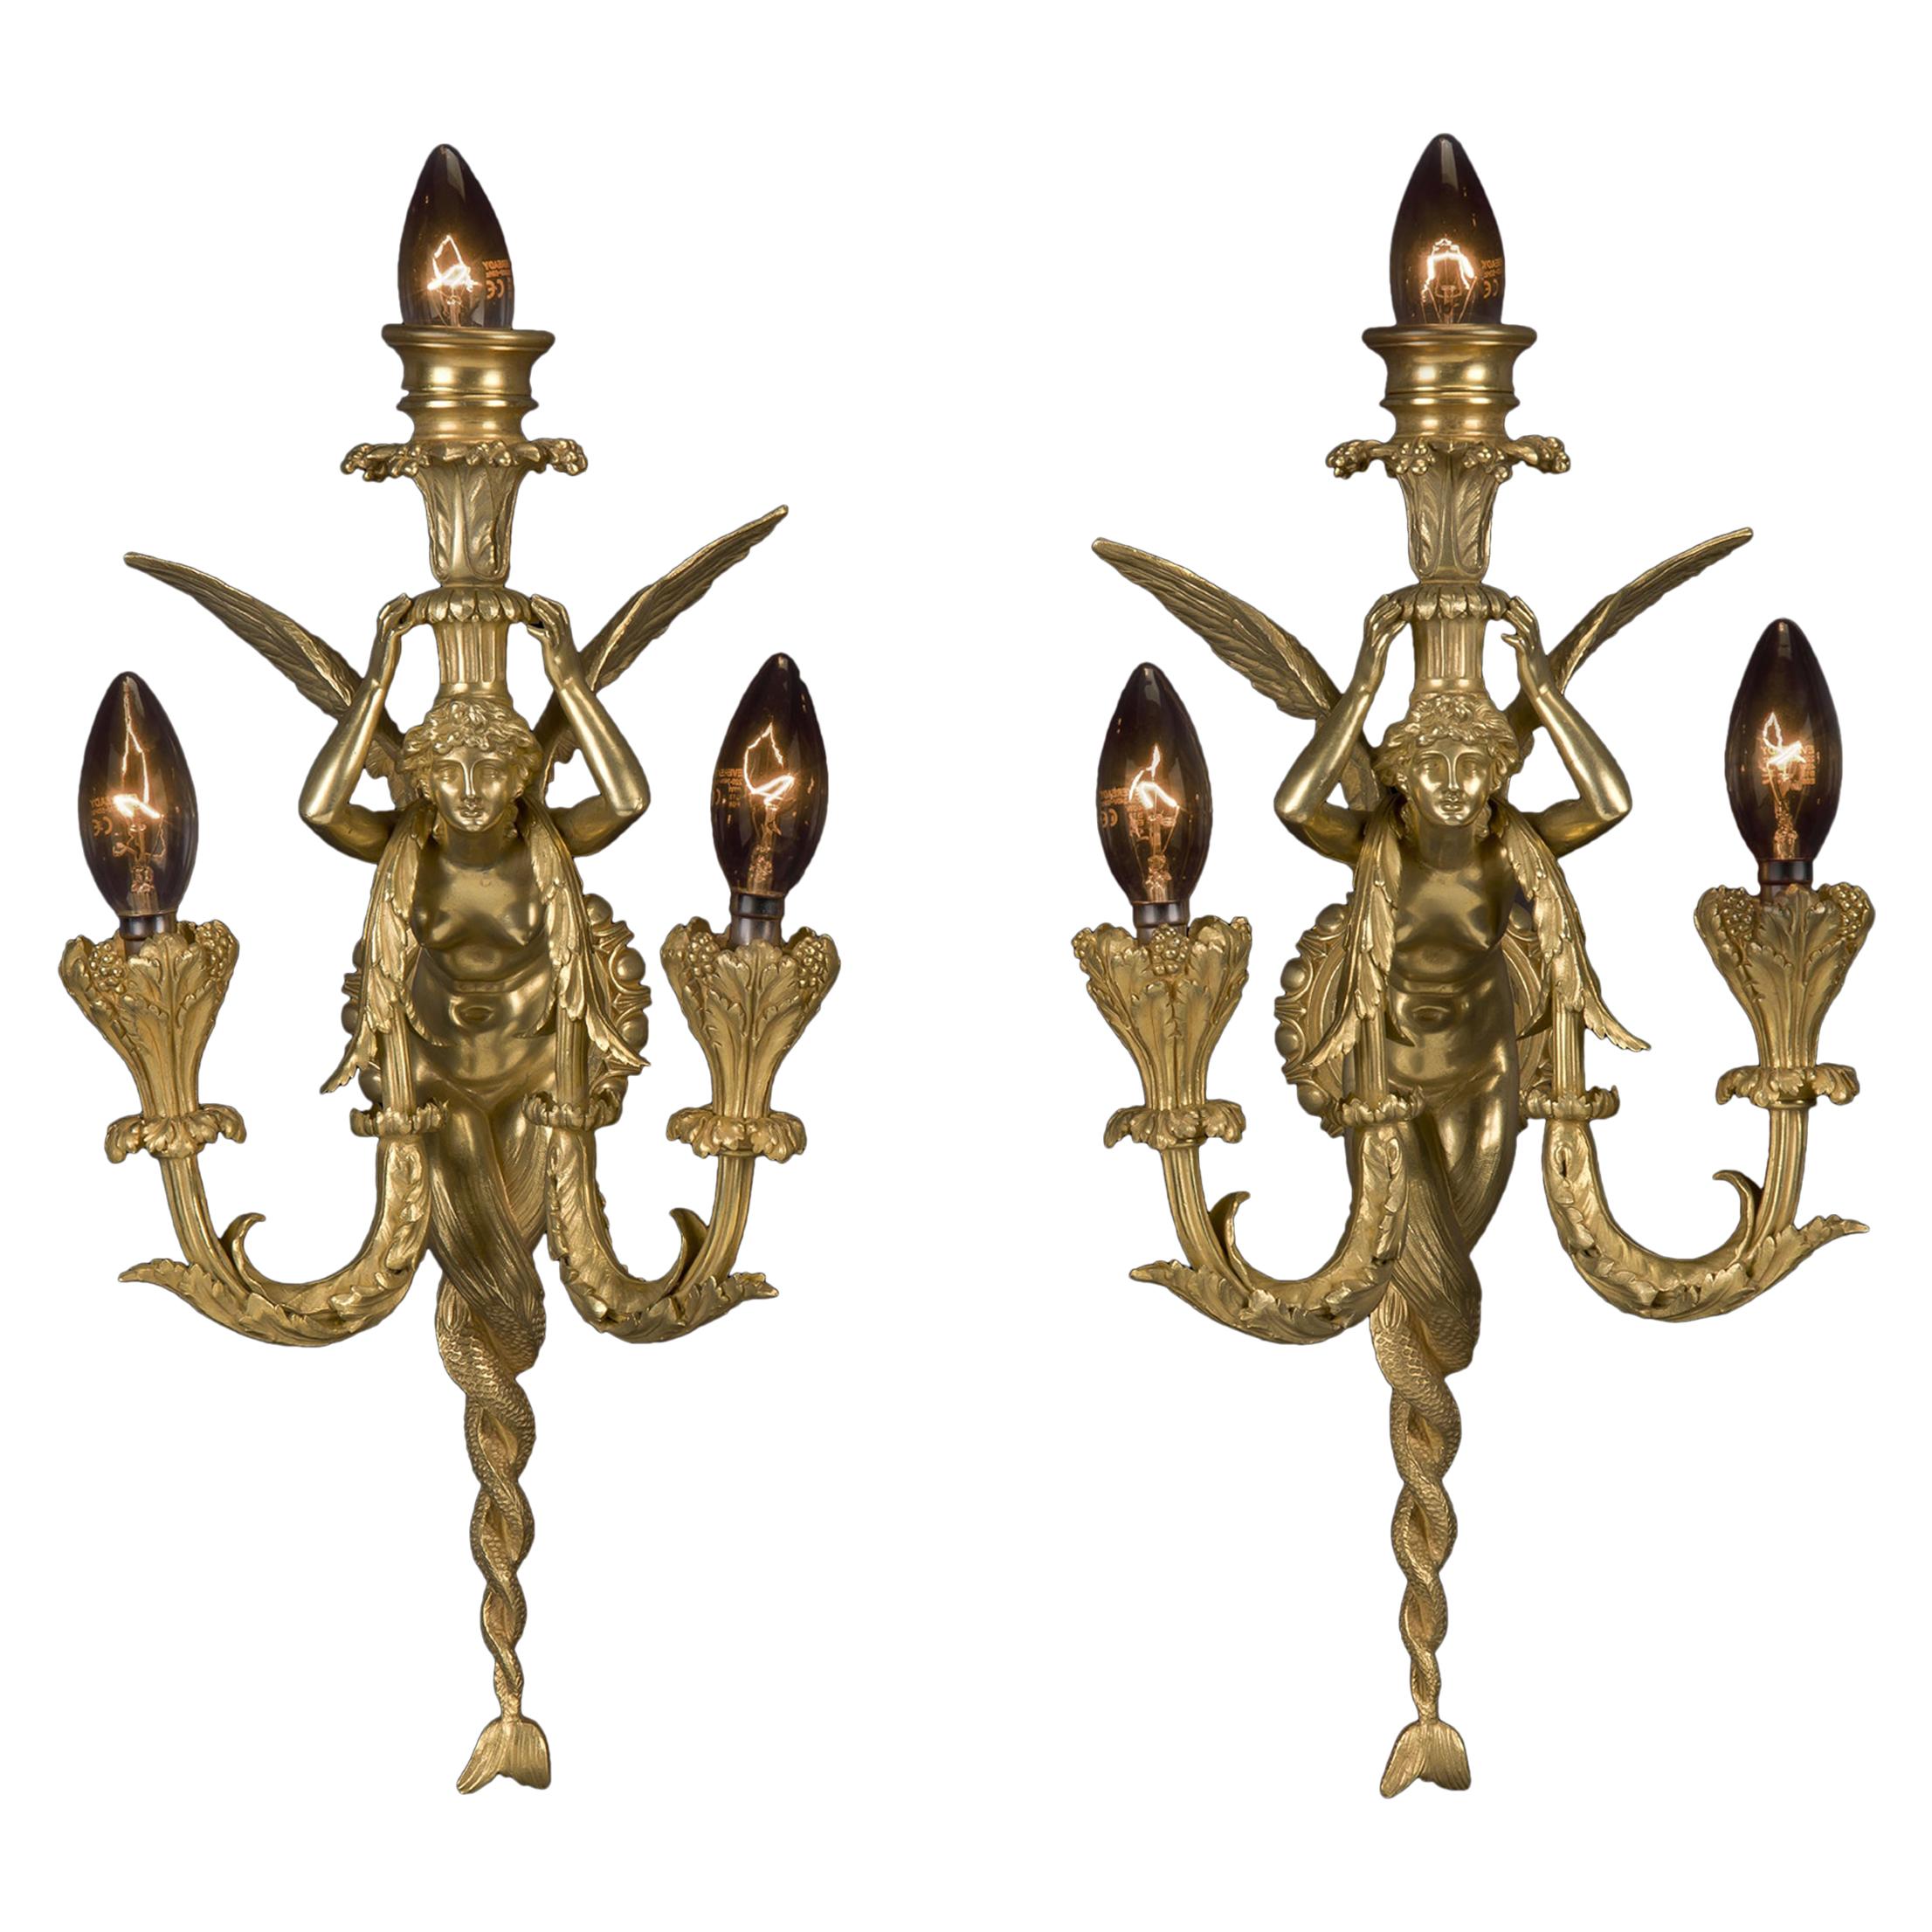 Pair of Napoléon III Gilt-Bronze Three-Light Wall Appliques, by Maison Millet For Sale